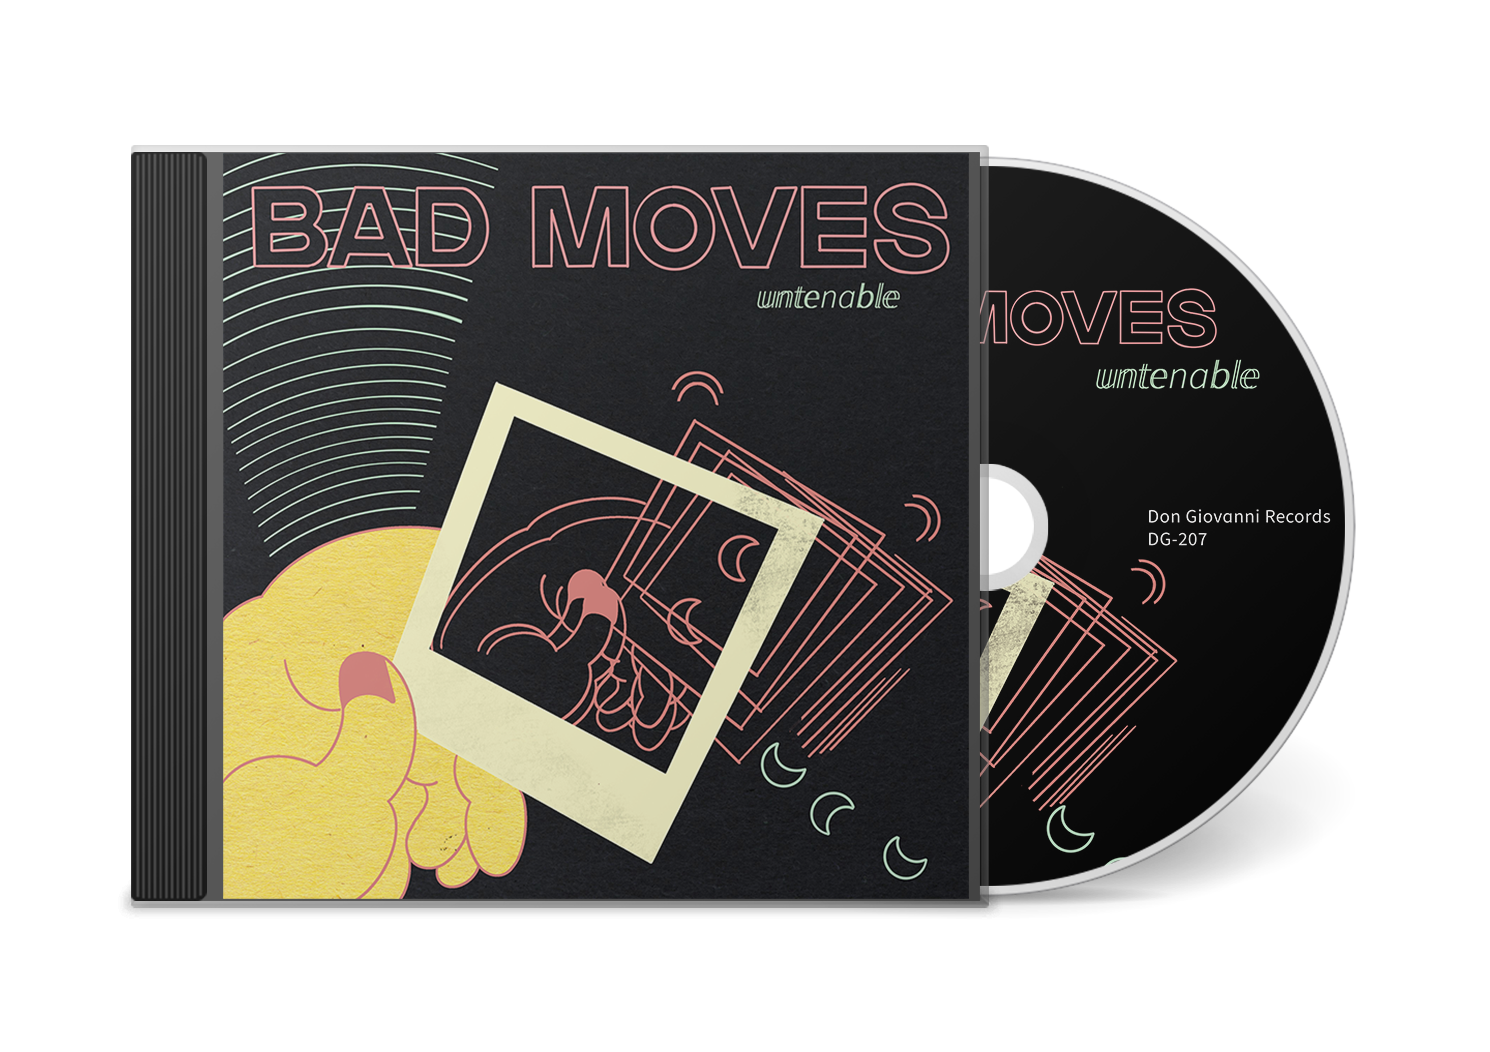 Bad Moves "Untenable" CD